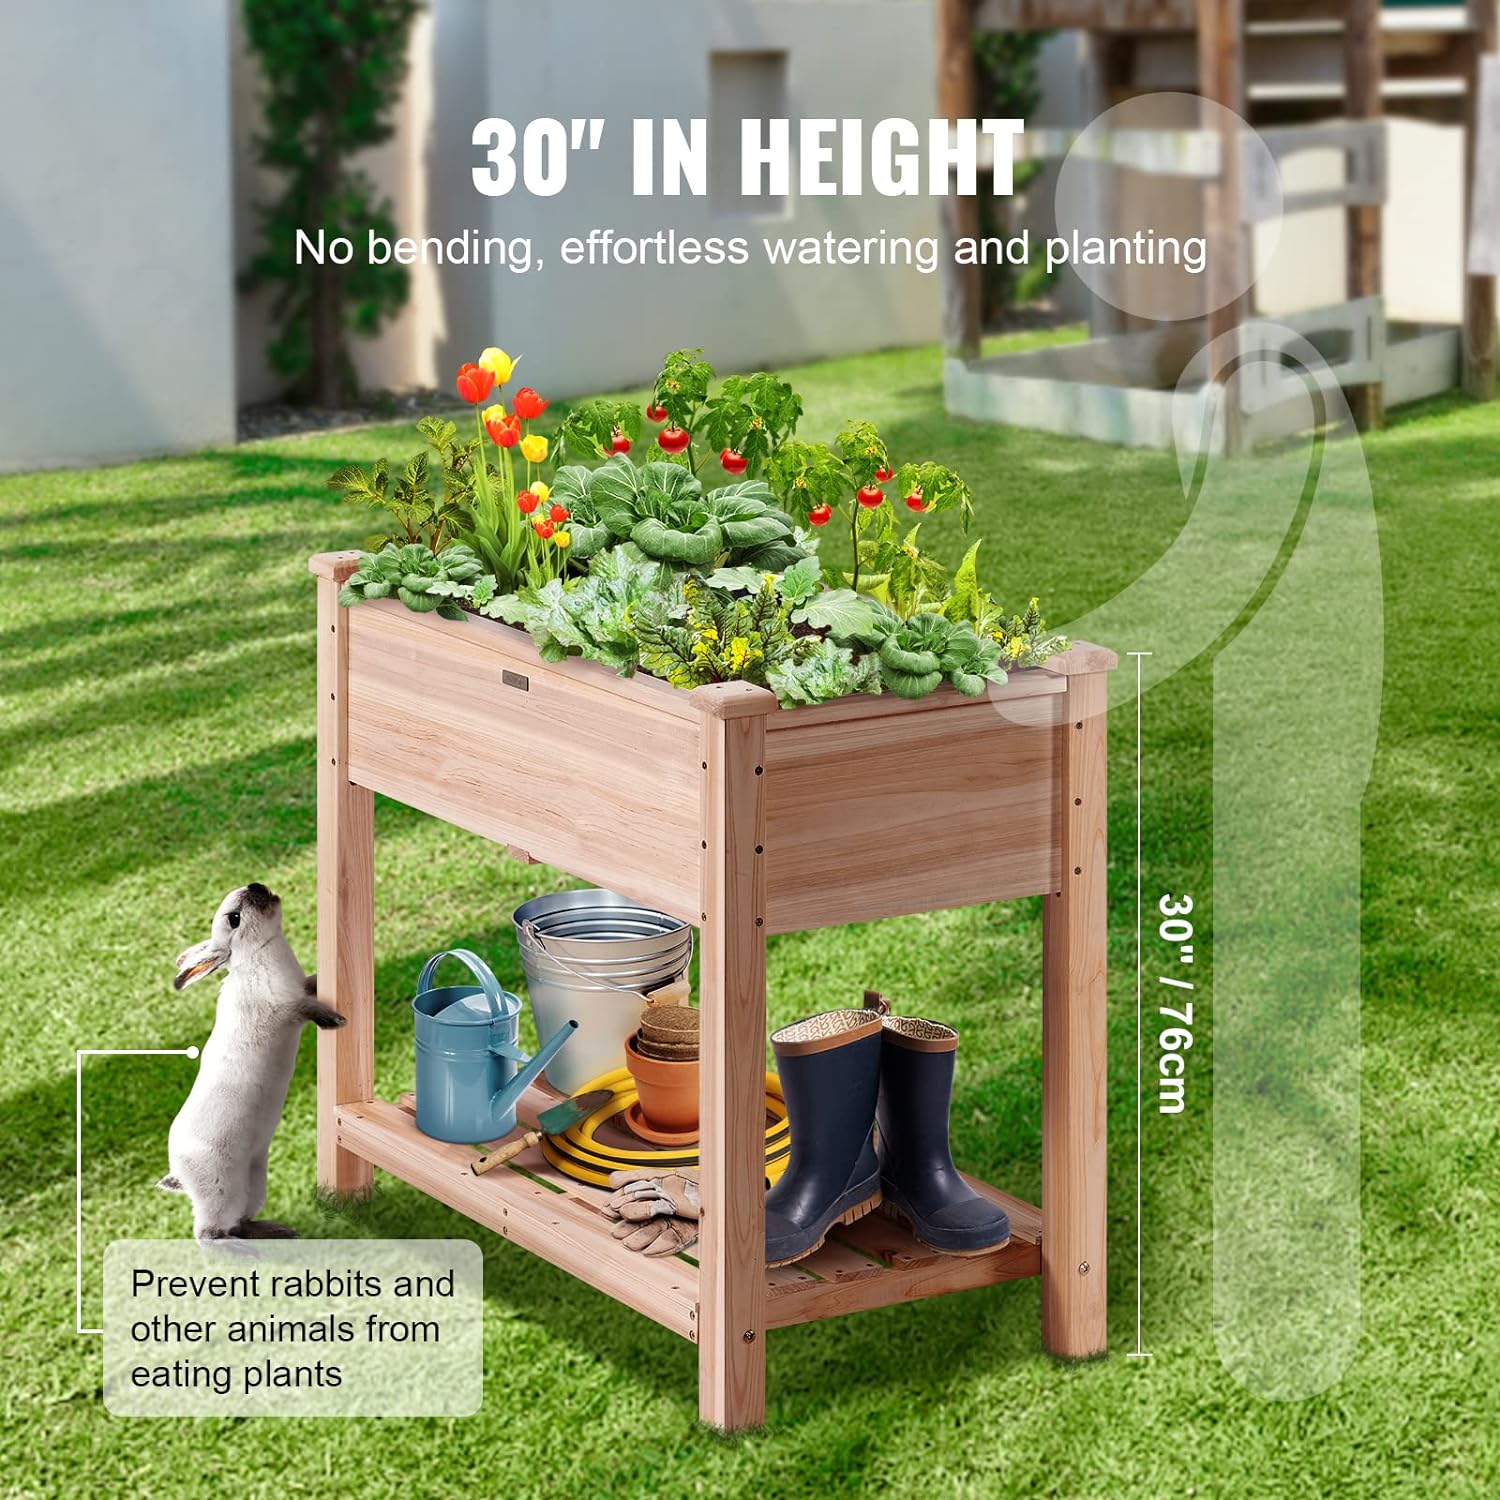 VEVOR Raised Garden Bed 34x18x30in with Sturdy Legs, High End Natural Fir Wood Planter Box Elevated Planting Stand for Backyard\/Garden\/Patio\/Balcony w\/Non -Woven Liner & 1 Set of Tool, 165lb Capacity